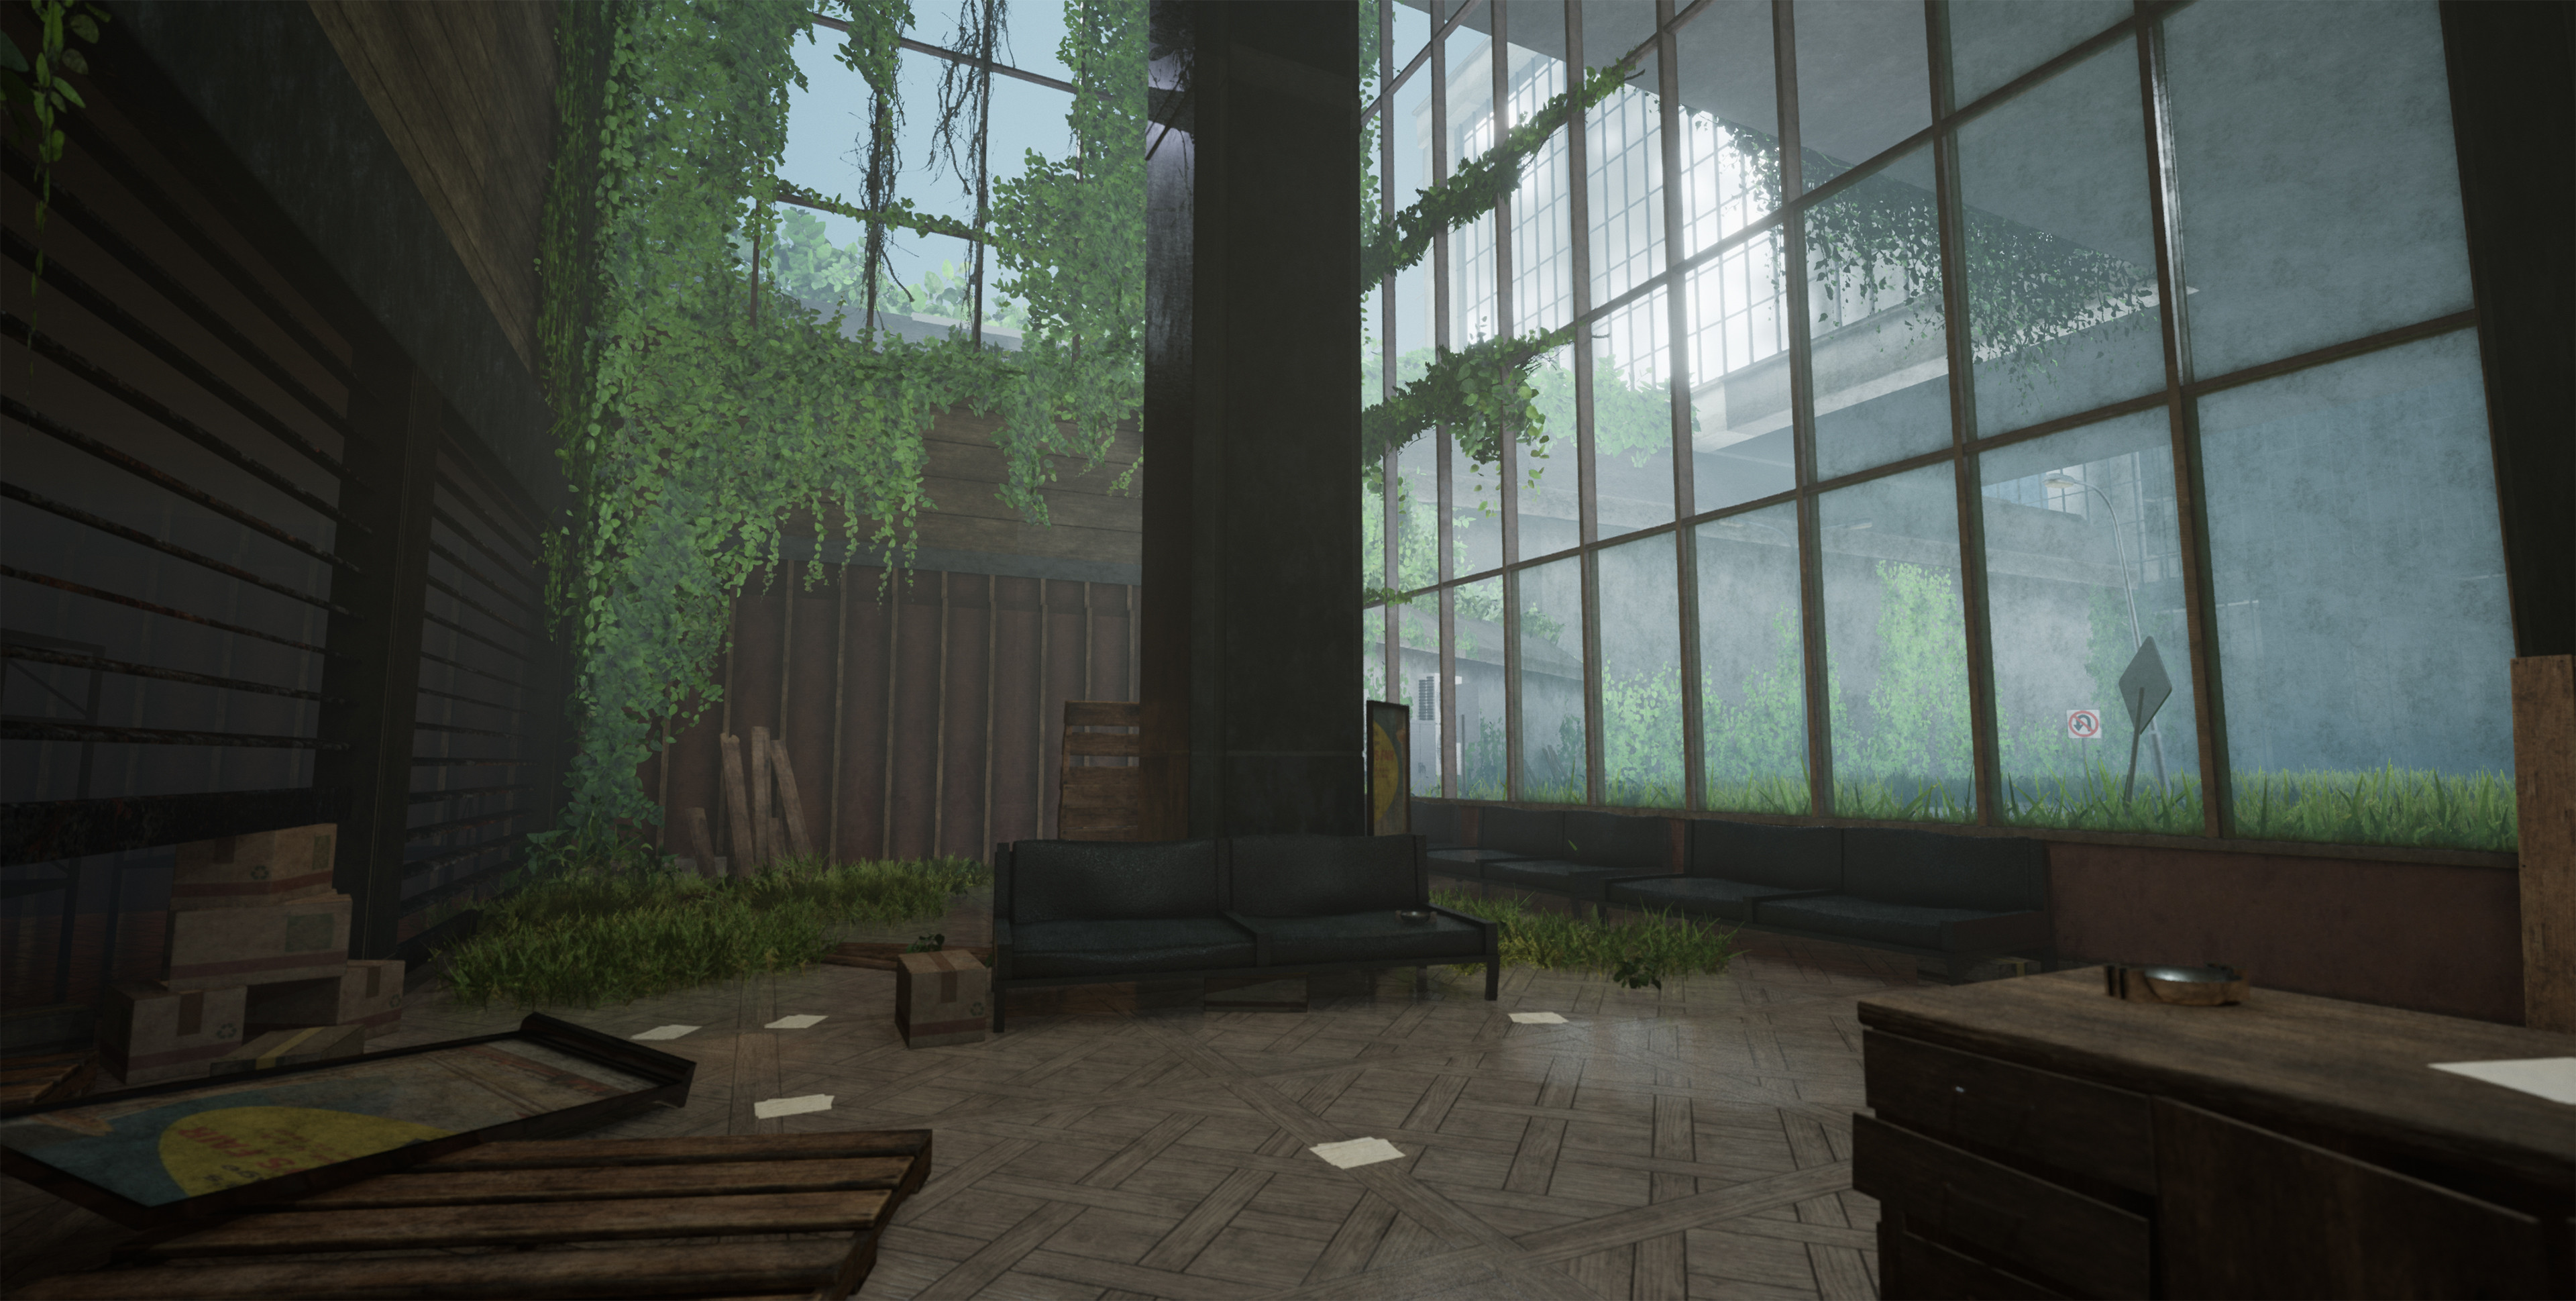 Dystopia:
12 Hour Project
UE4

With this quick project I was feeling a lot of inspiration from the Last of Us Part II and wanted to fill a similar aesthetic. A lot of time was spent piecing in the vegetation and building quick modular architecture